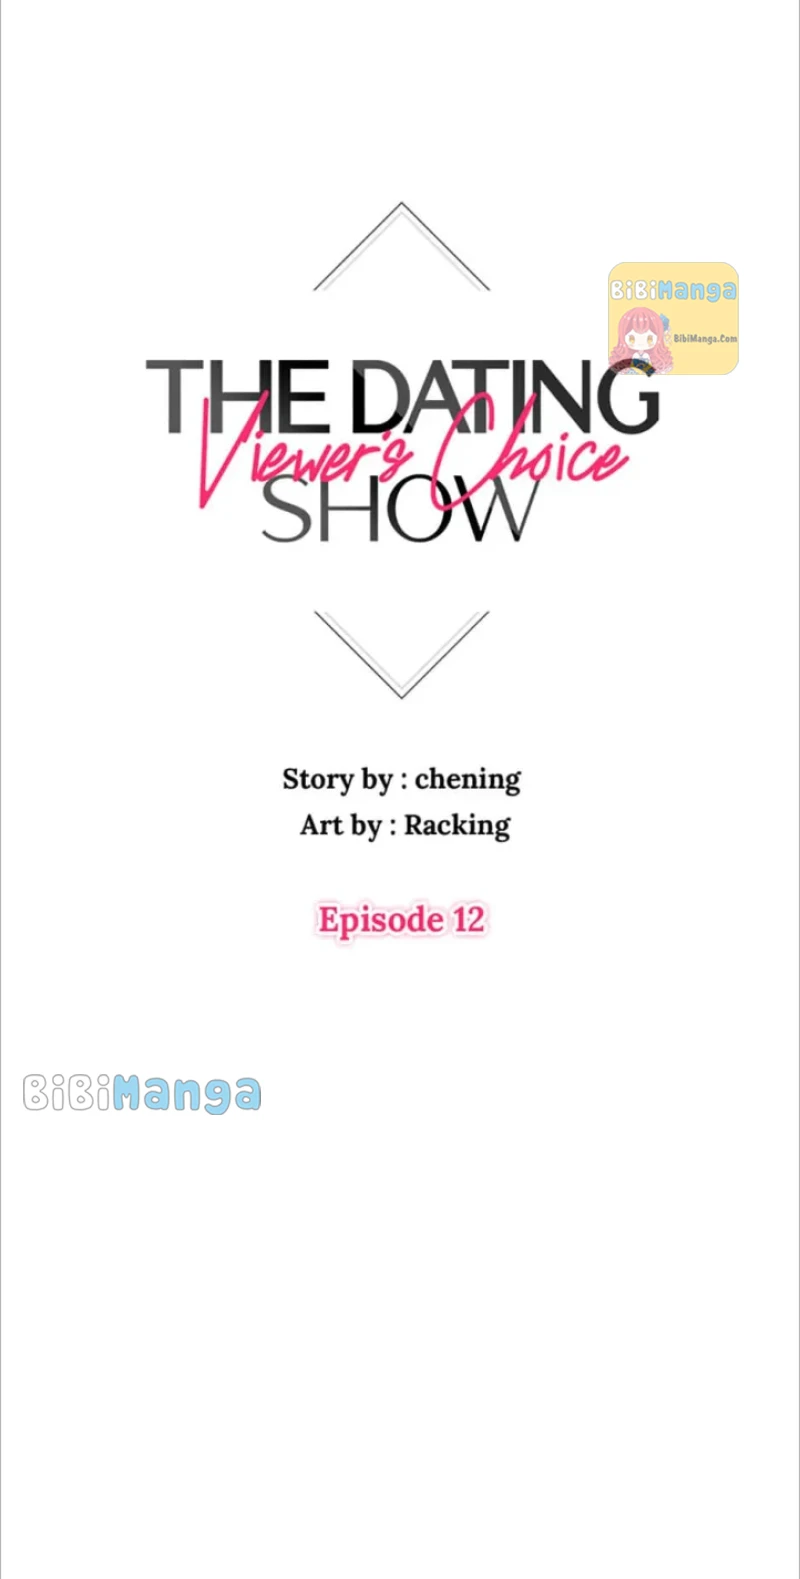 Viewer’s Choice: The Dating Show chapter 12